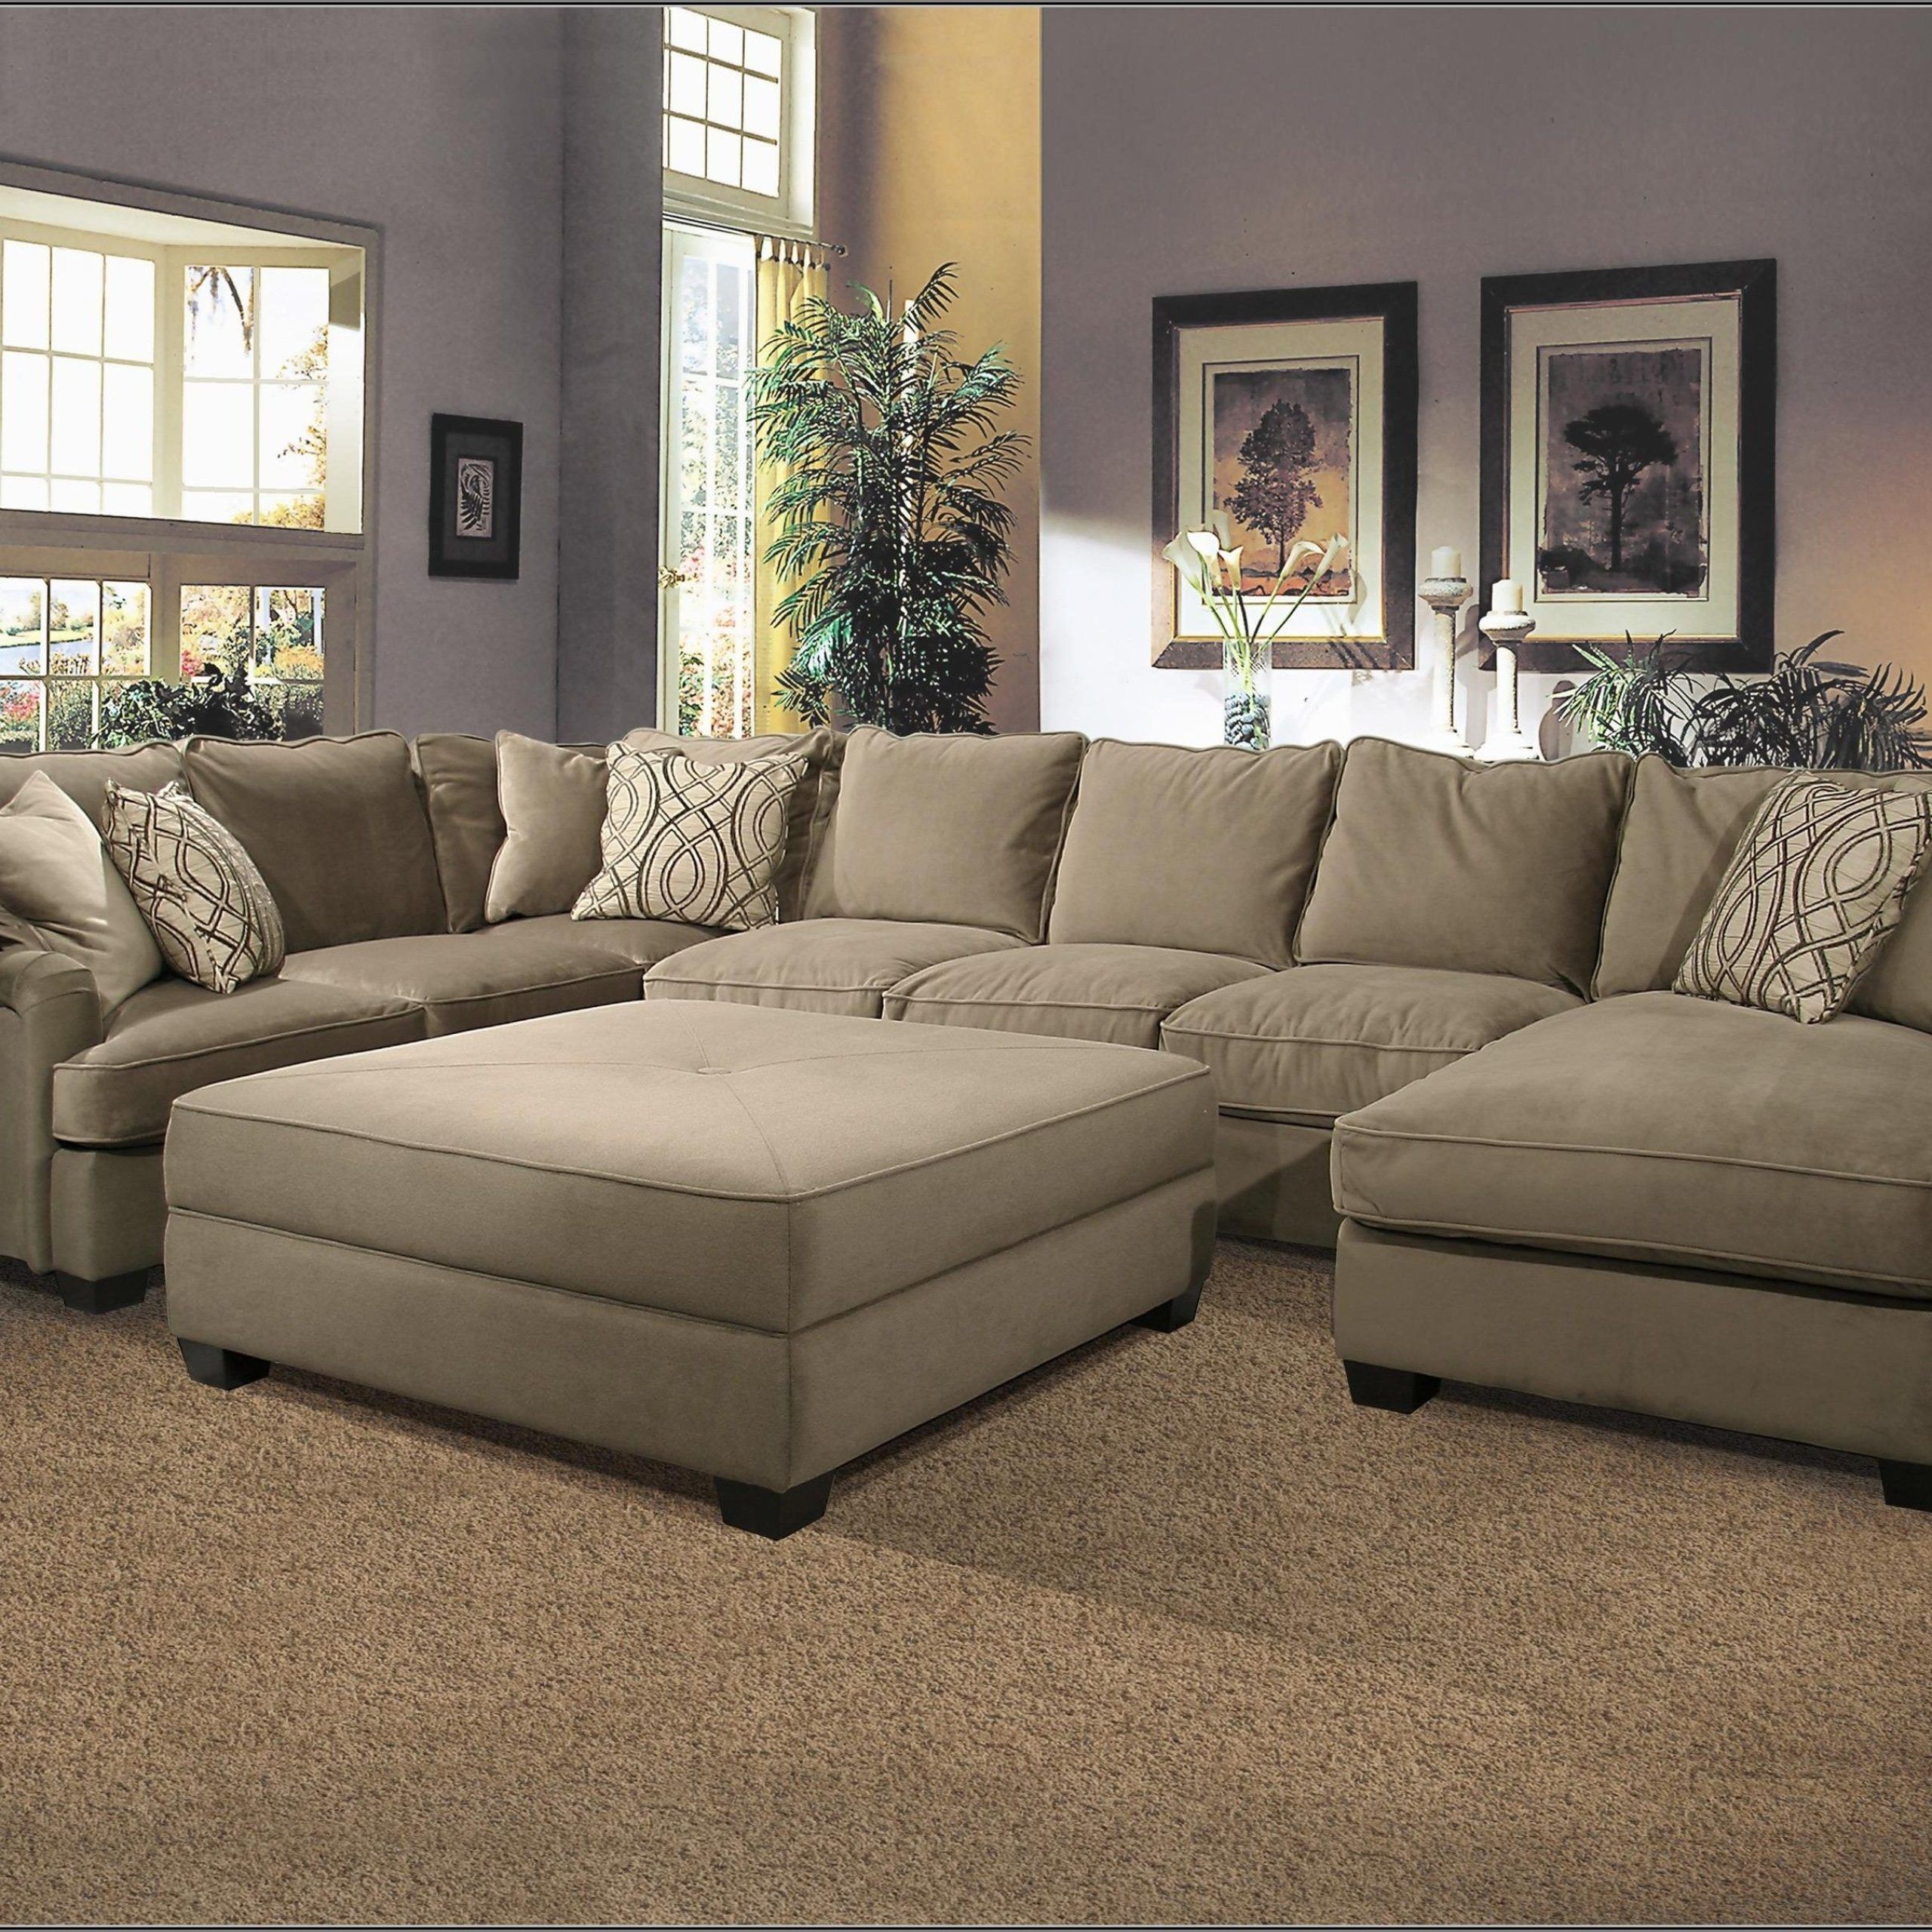 The Best Couches With Large Ottoman | Large Sectional Sofa, Sectional Sofa  Decor, Best Sectional Couches Intended For Sofas With Ottomans In Brown (View 9 of 15)